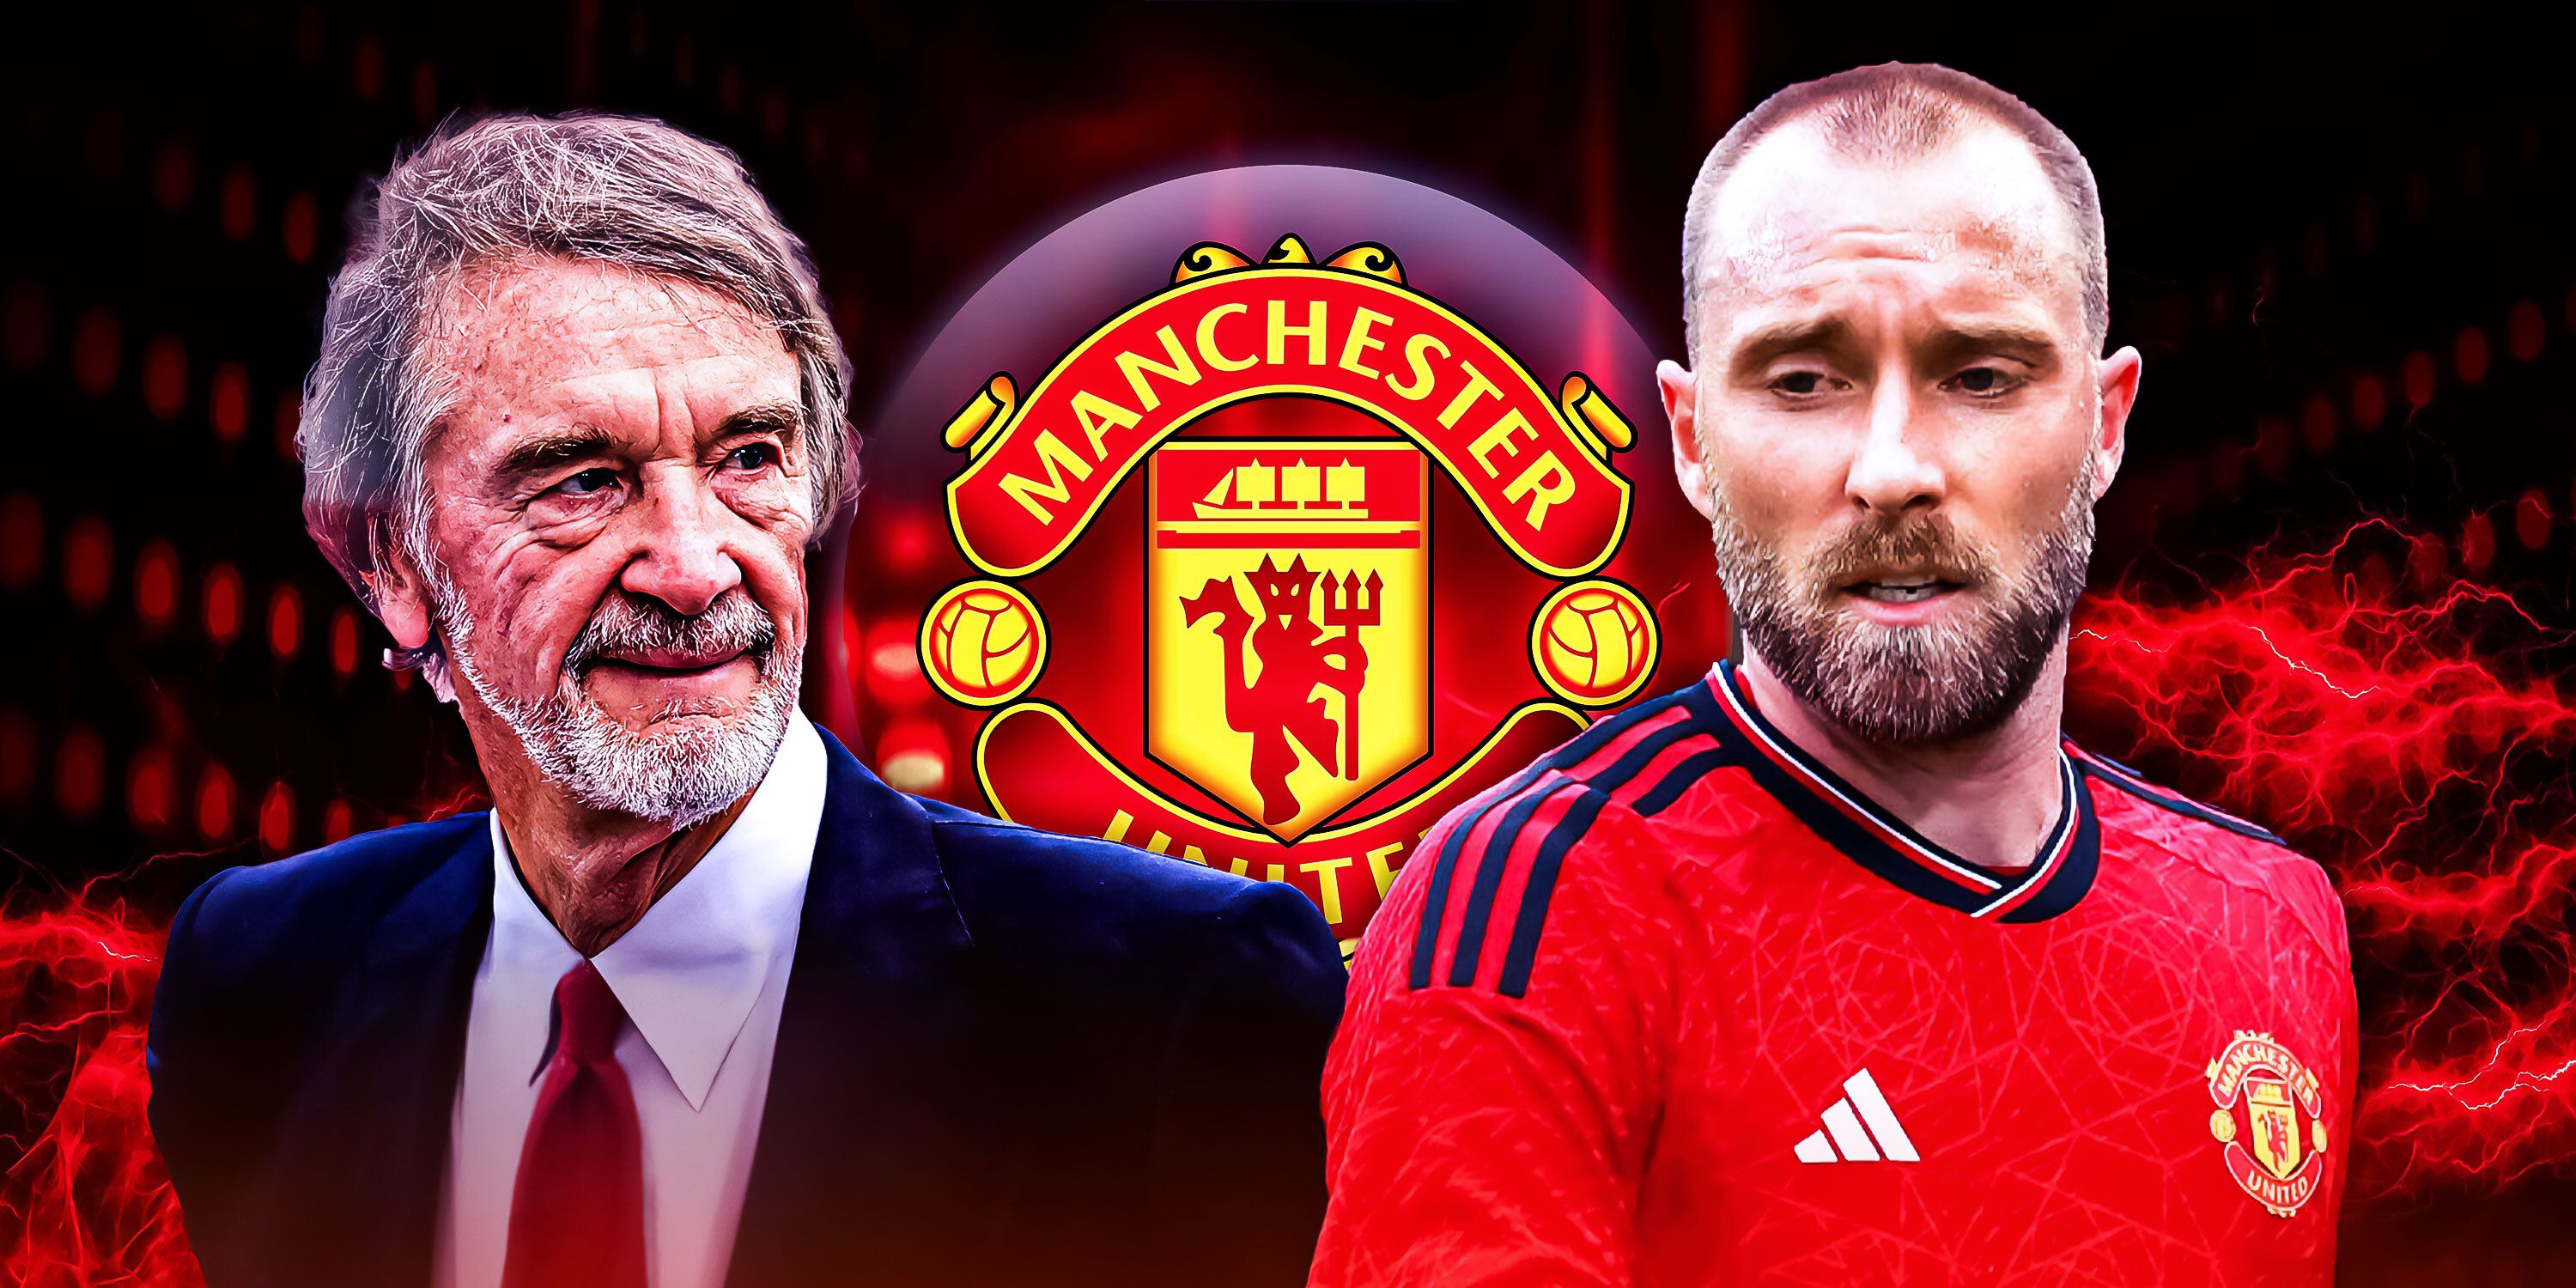 Manchester United minority owner Sir Jim Ratcliffe and Christian Eriksen